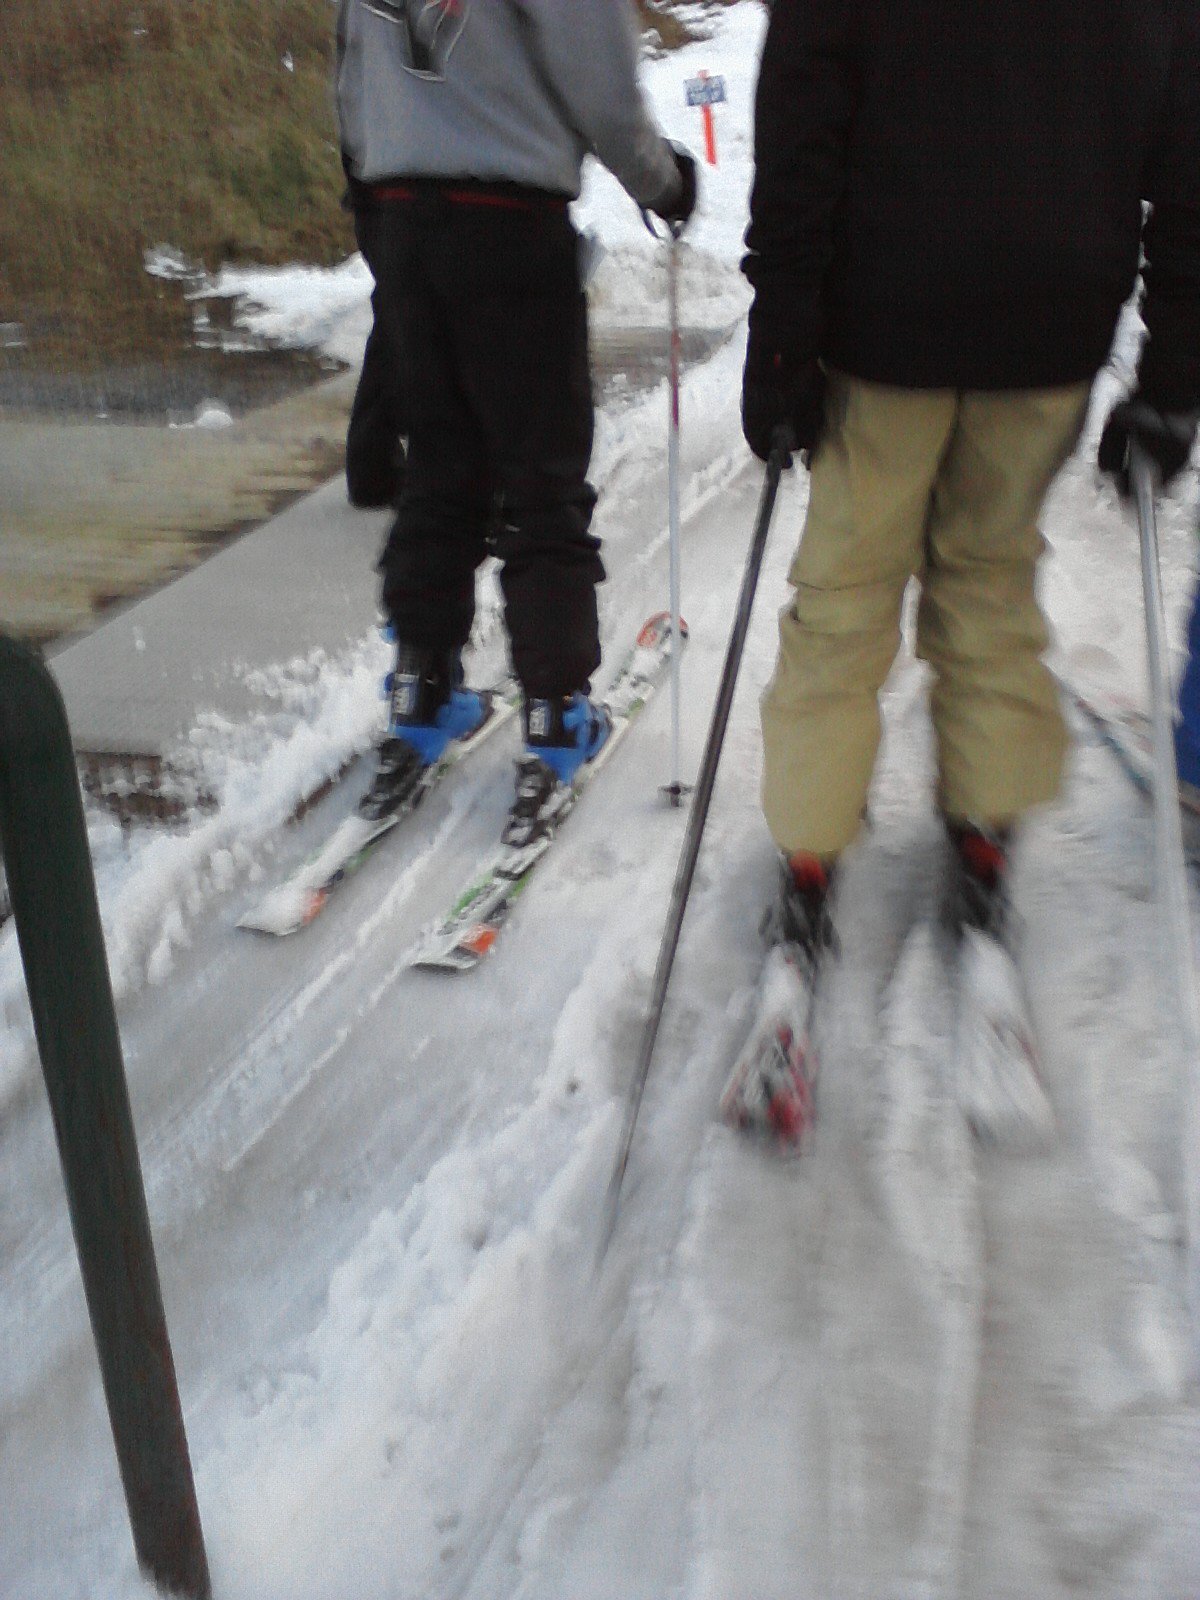 Full tilts and rental skis. classy 